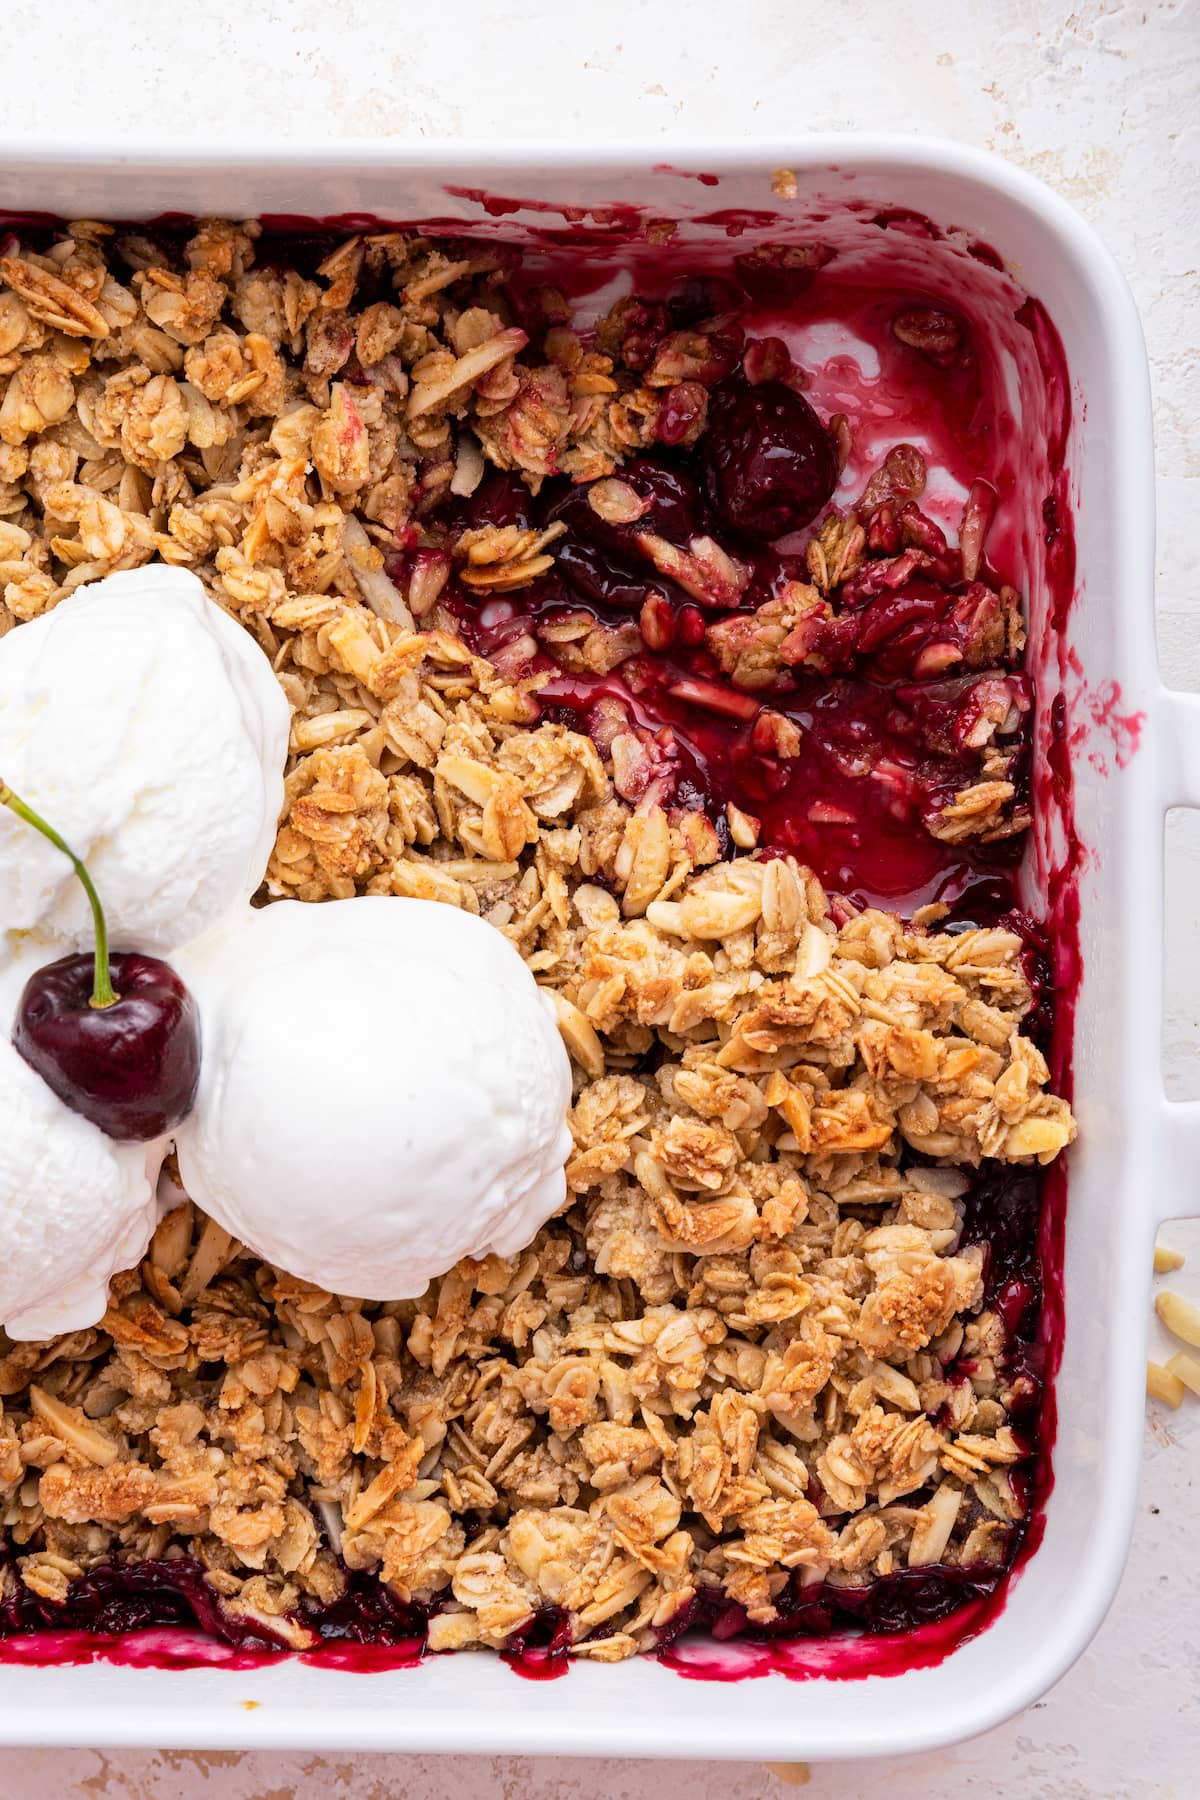 Cherry crisp in a square baking dish with three scoops of vanilla ice cream and a cherry in the middle. There is a serving of cherry crisp missing from a corner of the baking dish.